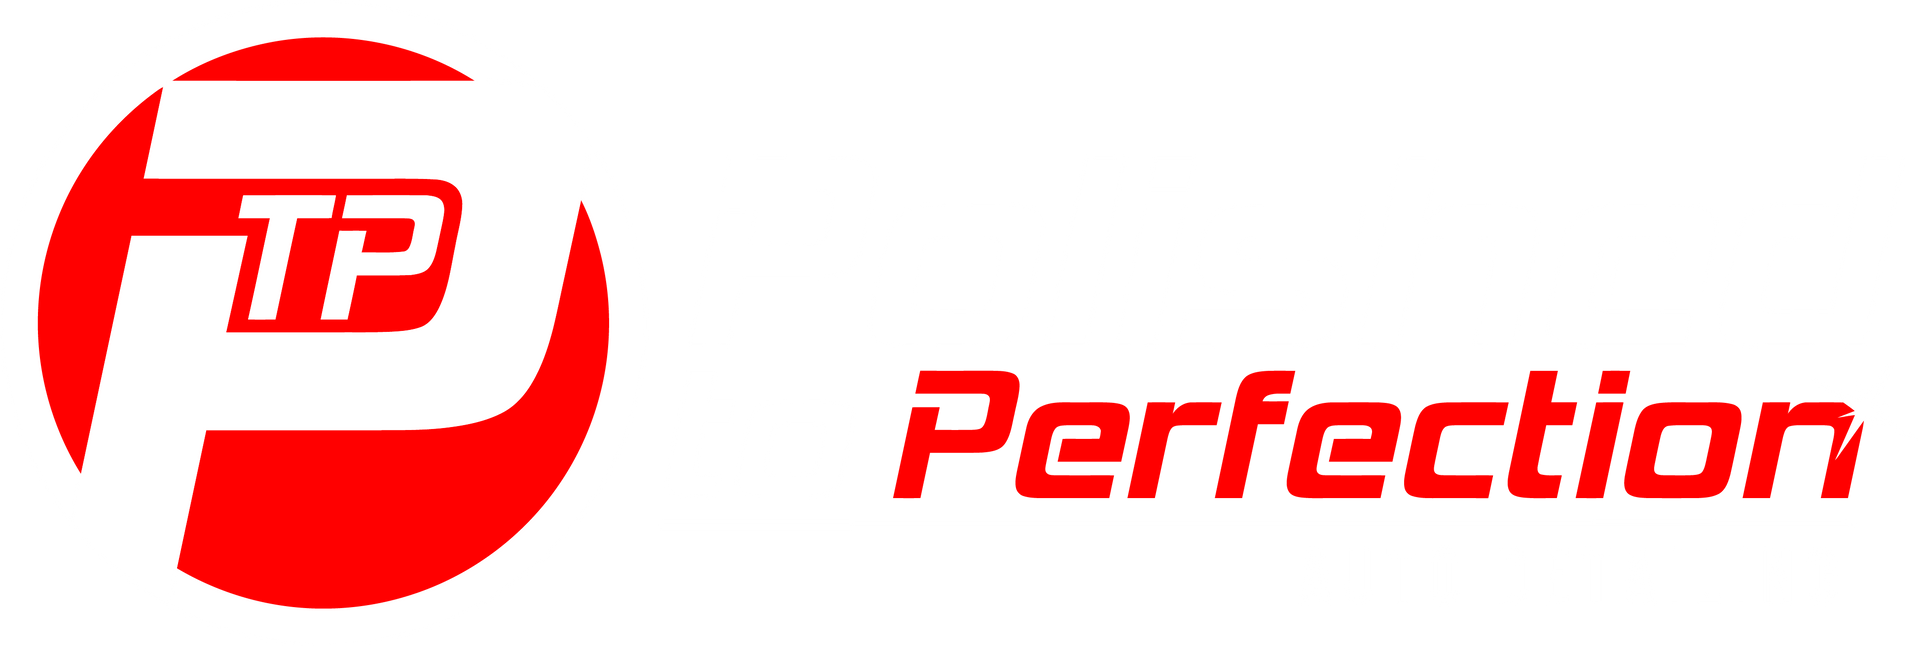 polished-to-perfection-logo